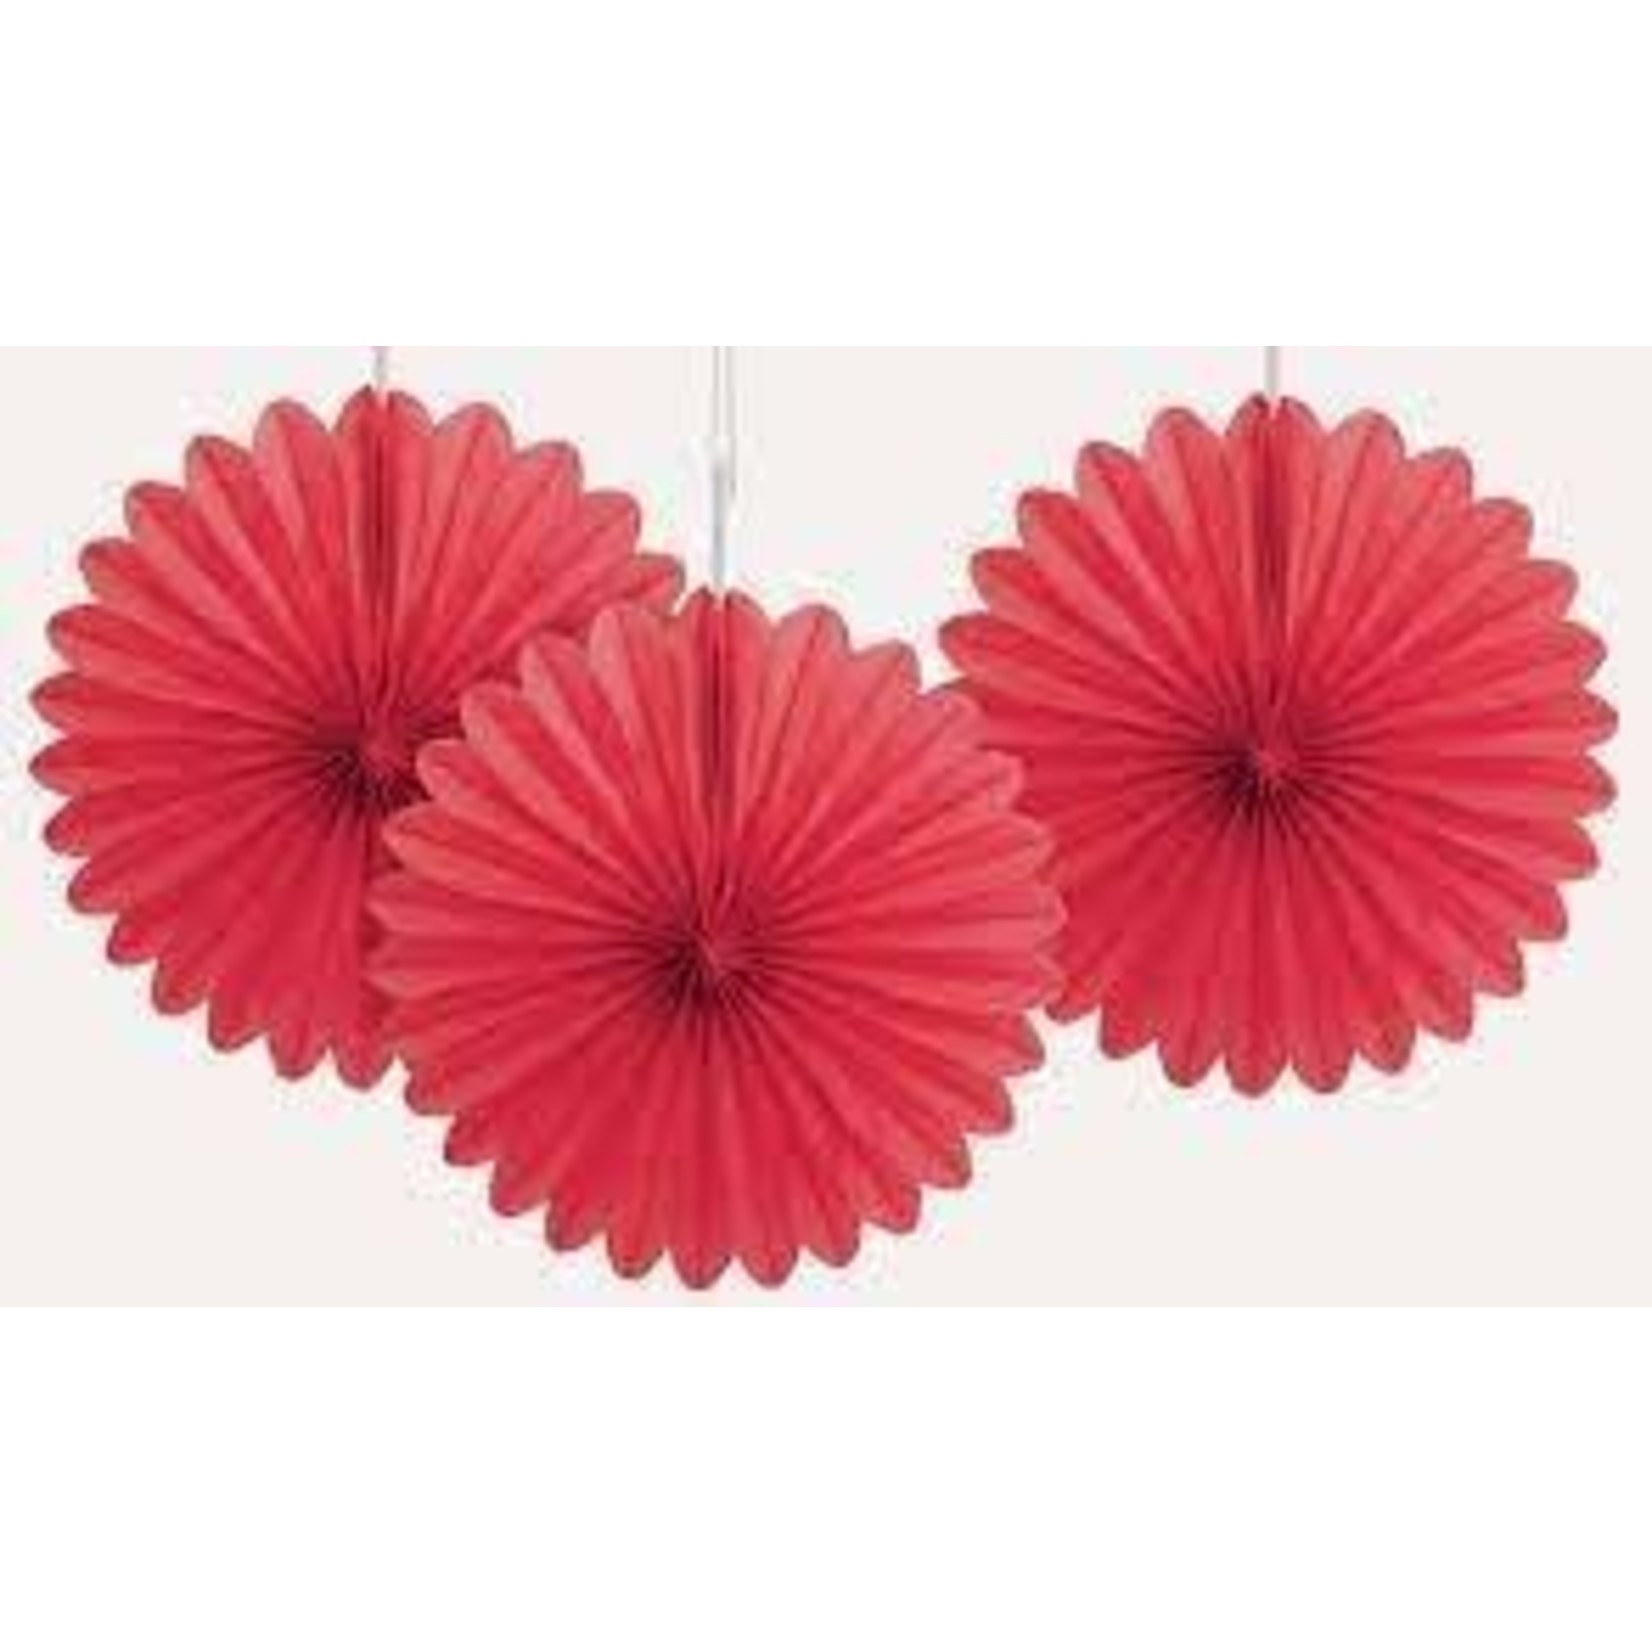 Red Decorative Fans